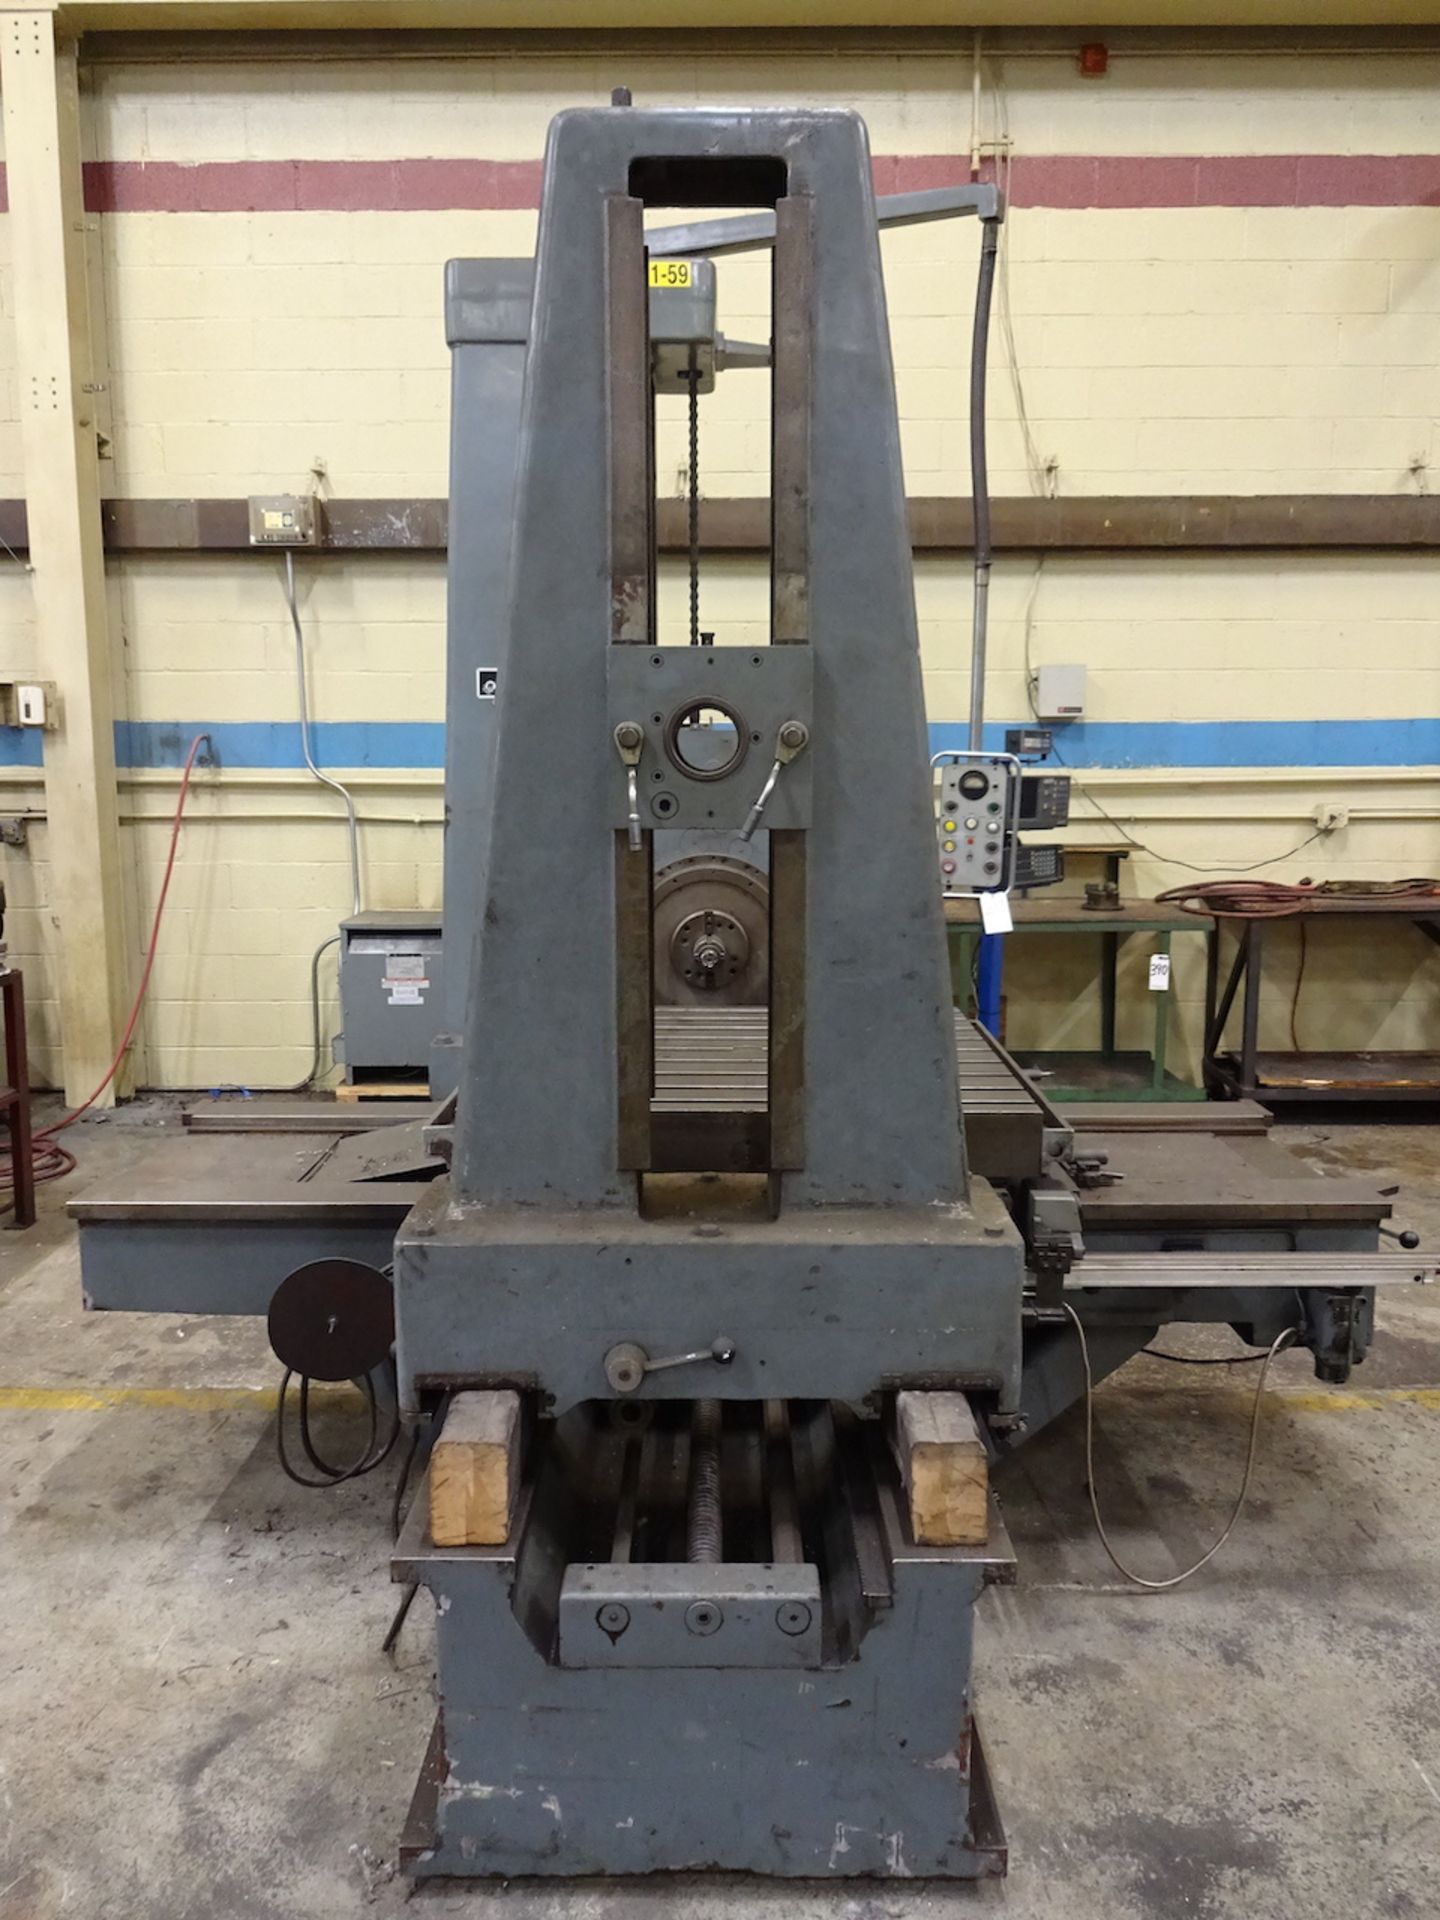 MEUSER MODEL M76BFS HORIZONTAL BORING MILL, S/N M76BFS-45286, 39 X 39 BUILT-IN ROTARY TABLE, 7. - Image 2 of 20